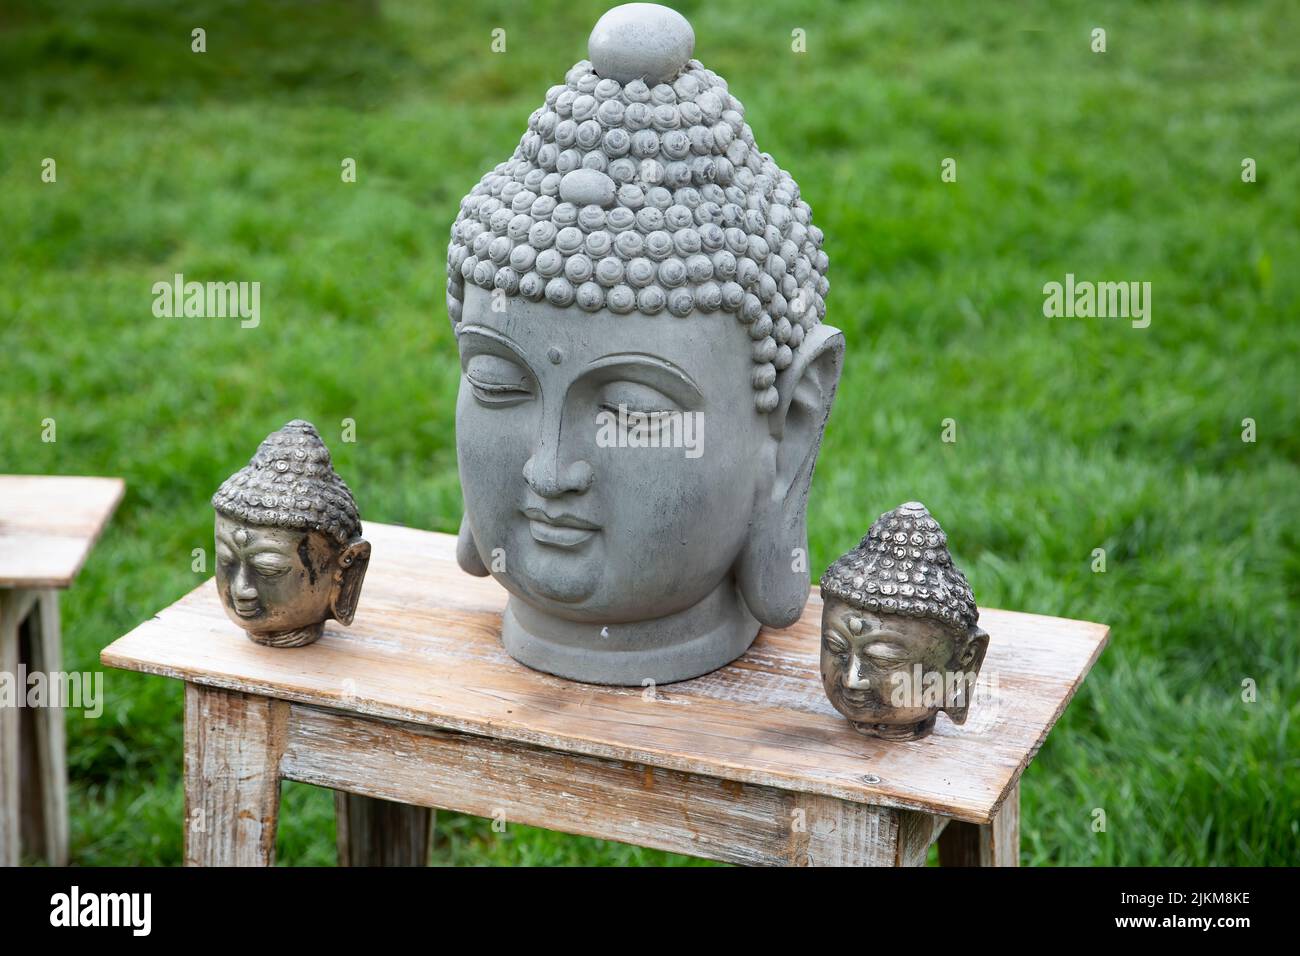 Stone heads of Buddha on a wooden table in the garden Stock Photo